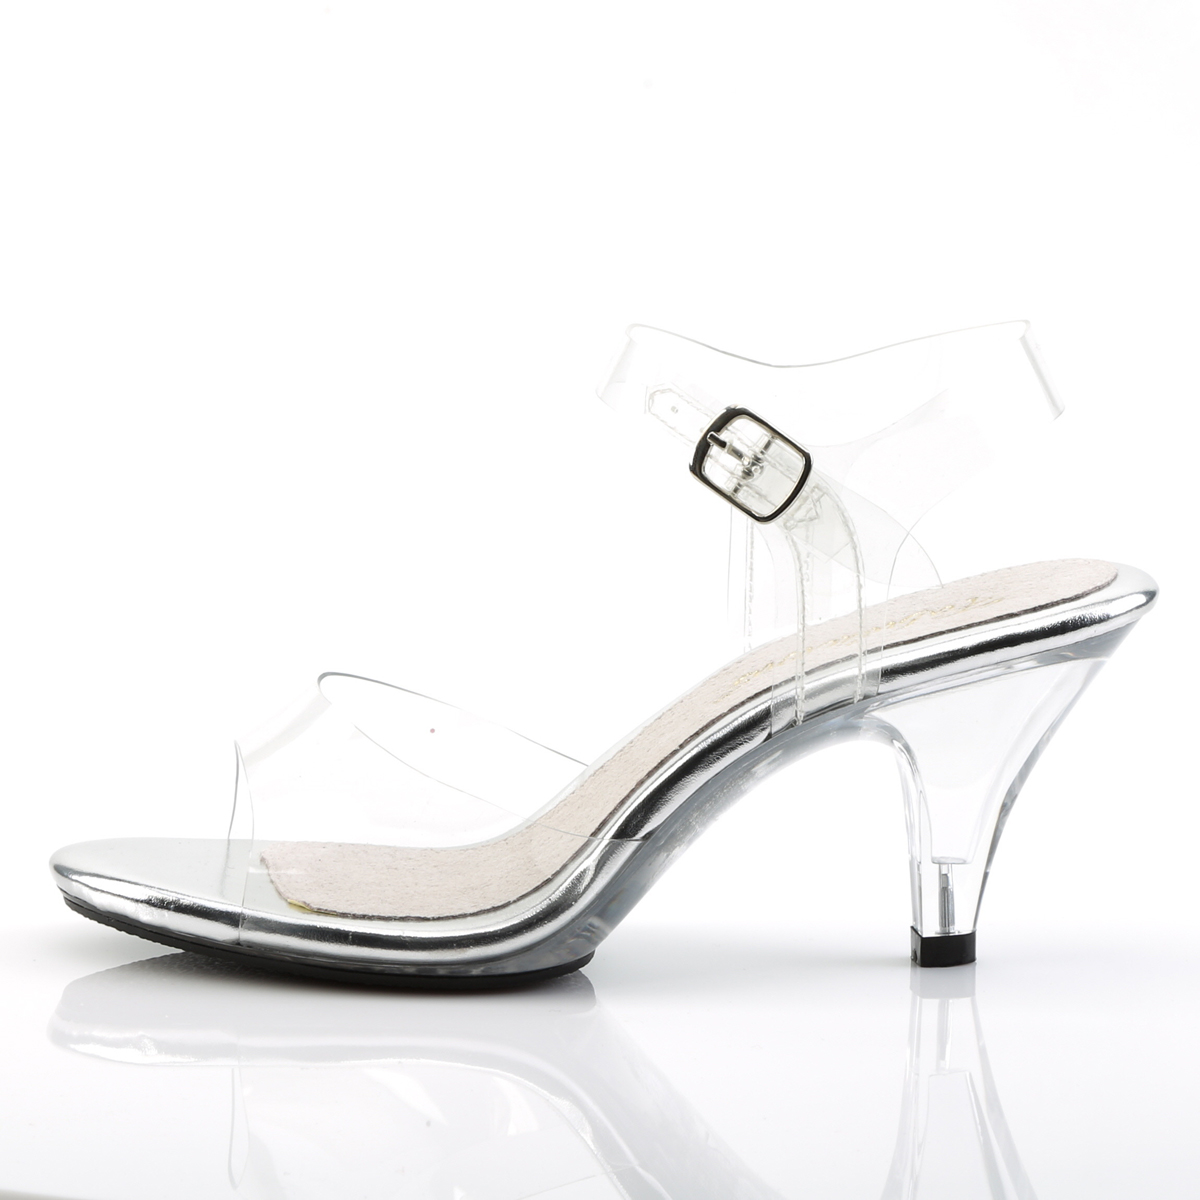 Clear Ankle Strap Perspex Chunky High Heel Sandals | Heels, Sandals heels,  High heel sandals